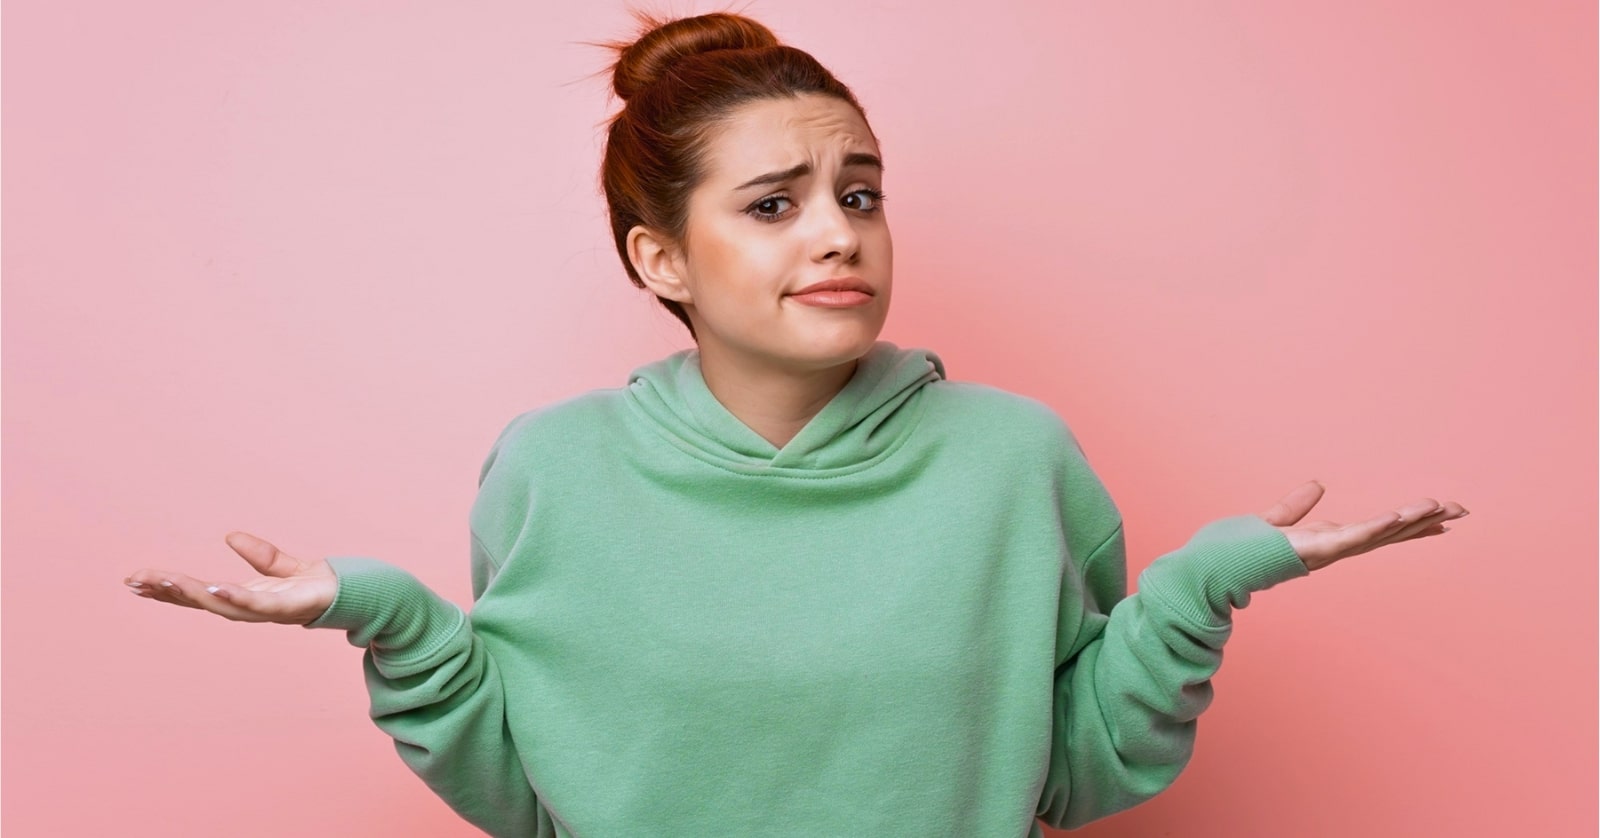 young woman in green hoodie shrugging her shoulders as if to say "I don't know"